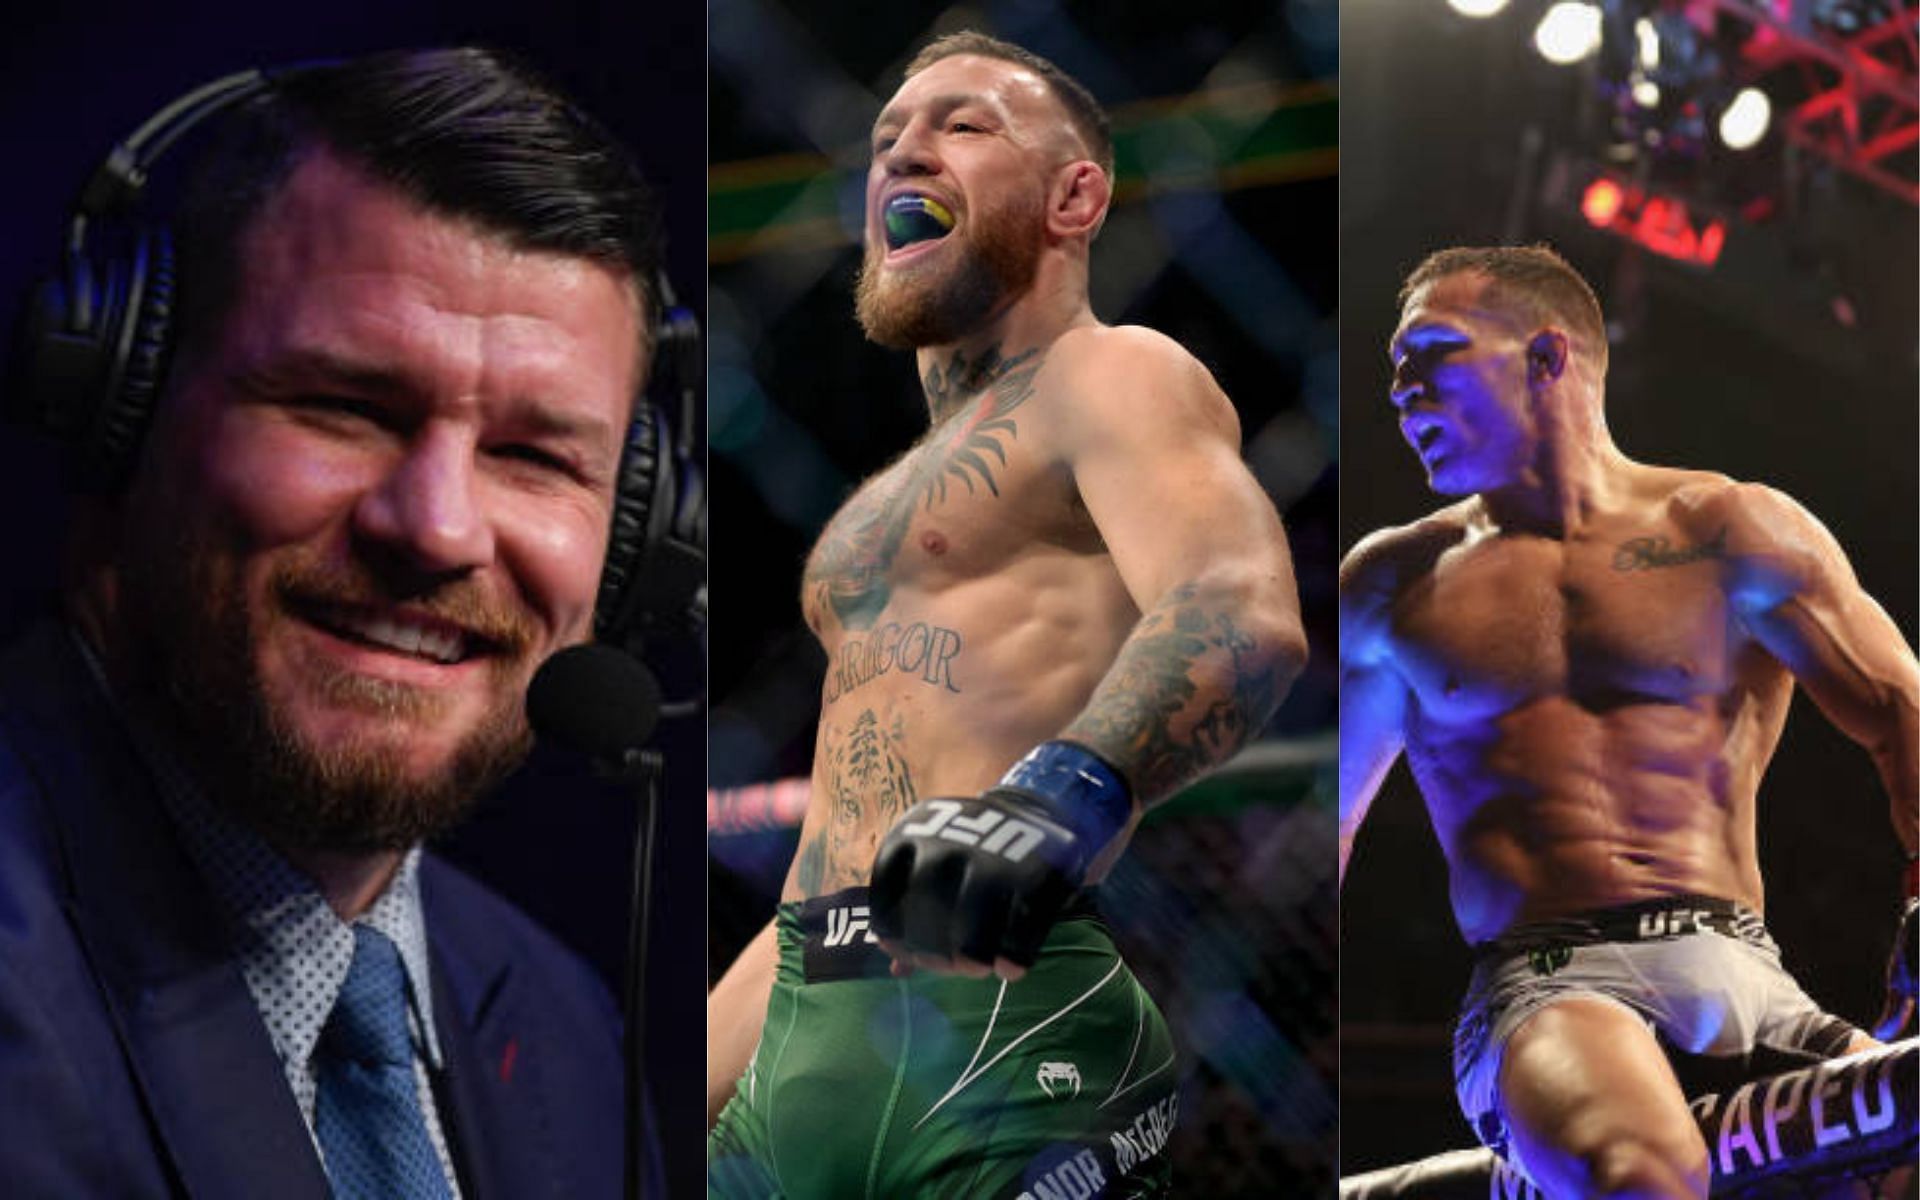 From left to right: Michael Bisping, Conor McGregor, and Michael Chandler